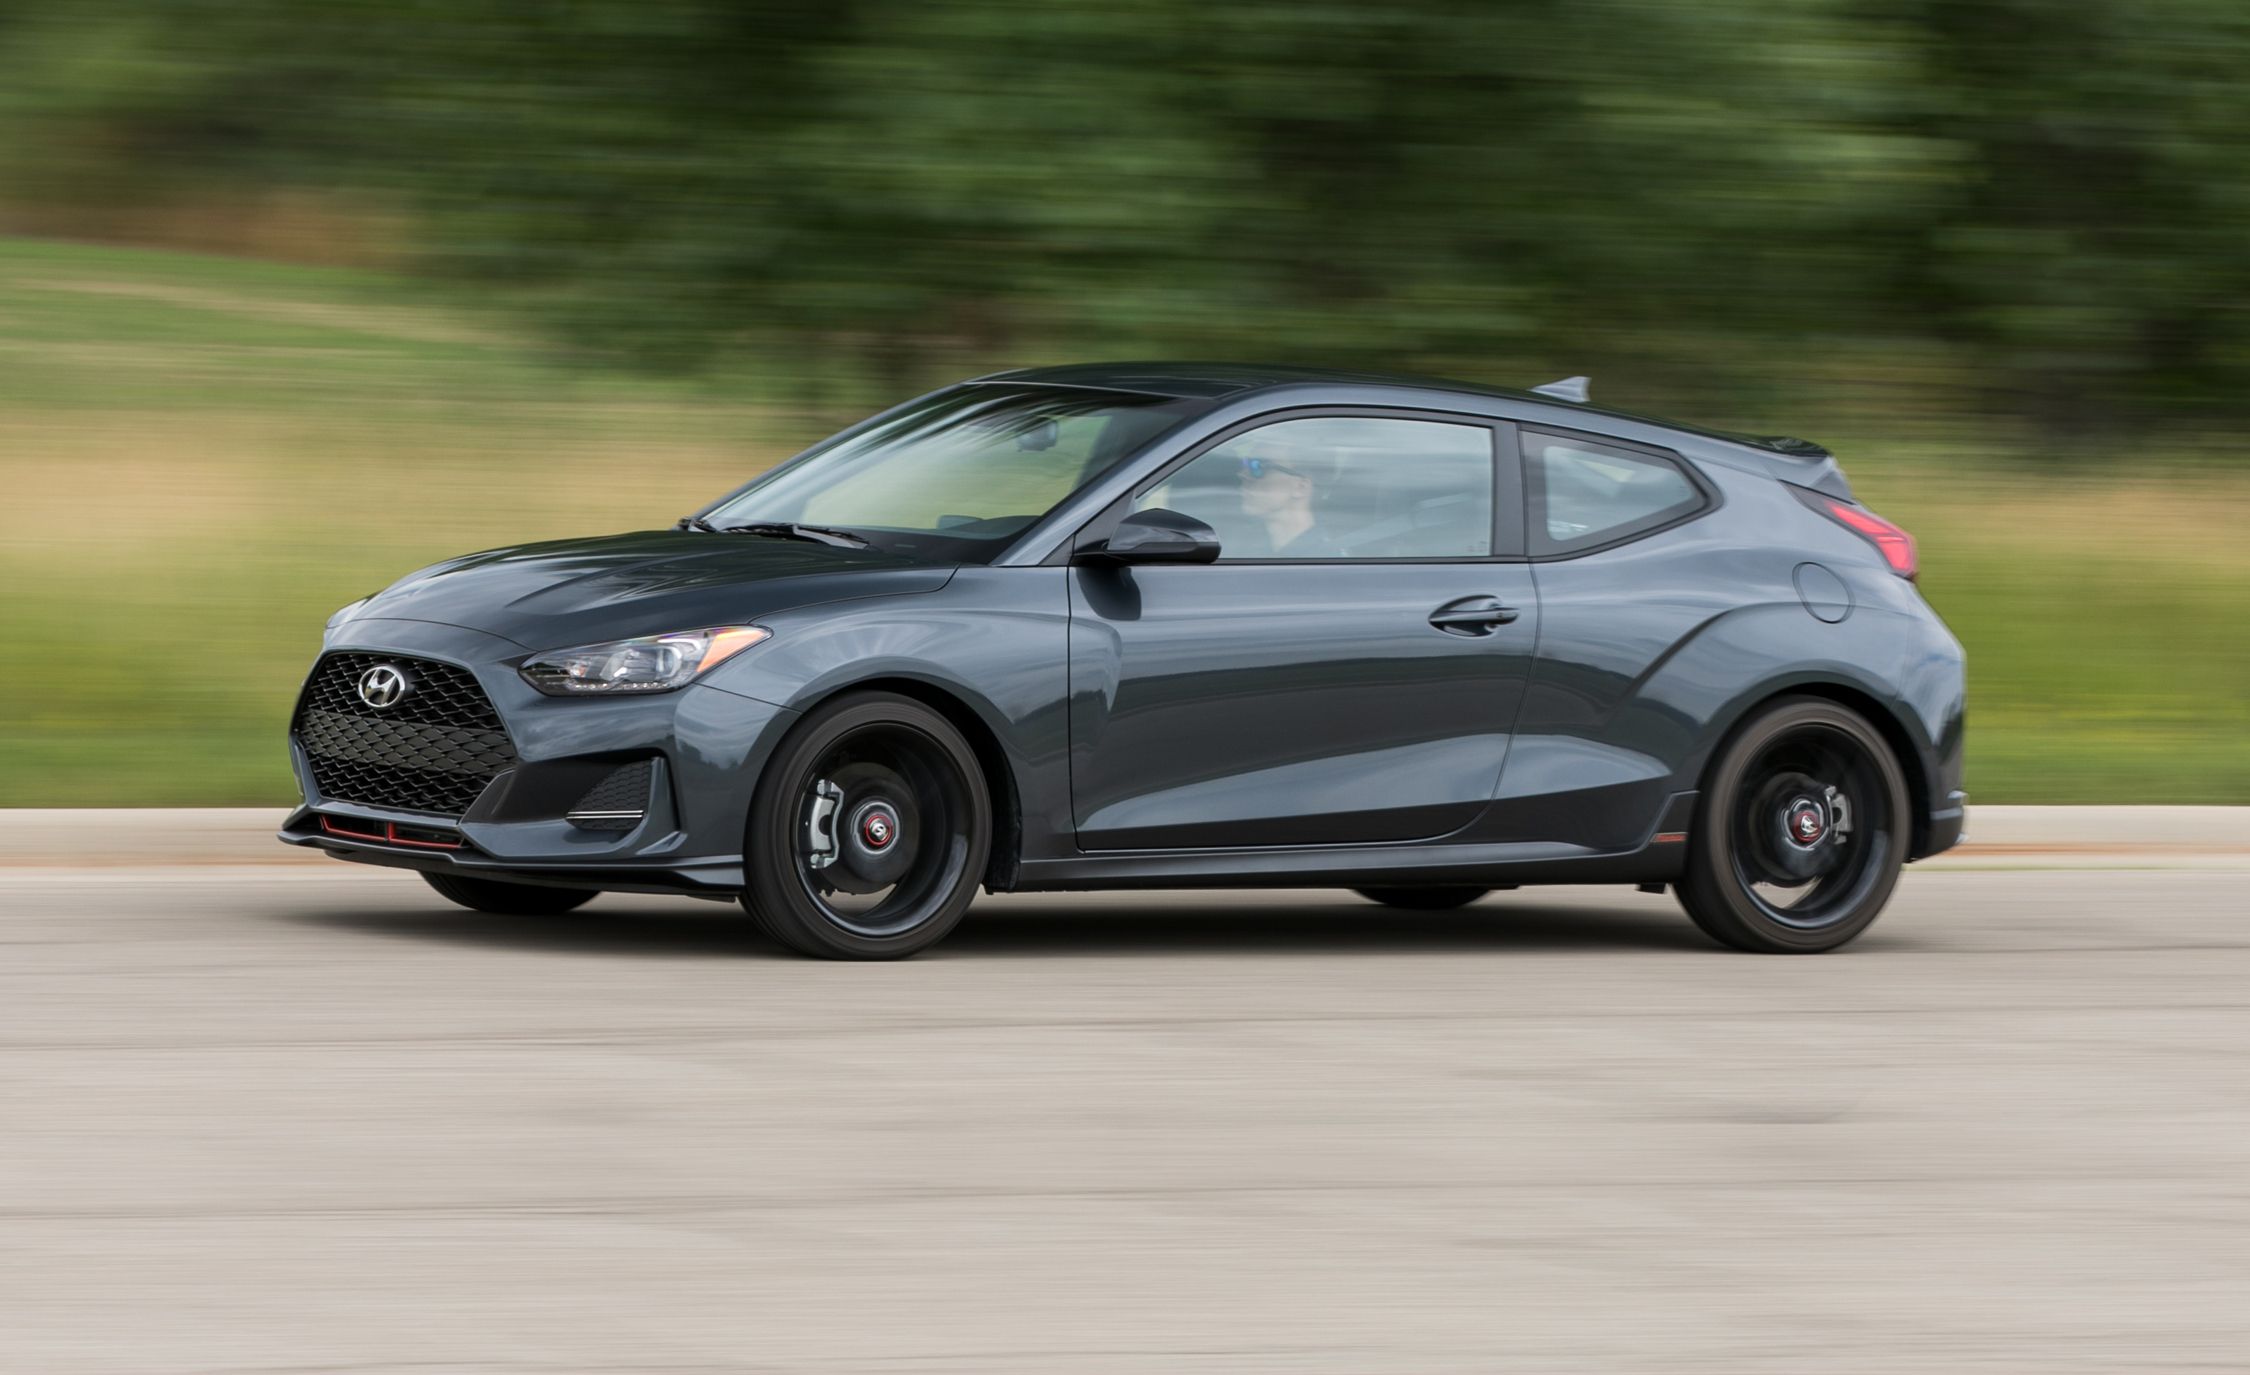 2021 Hyundai Veloster Review, Pricing, and Specs